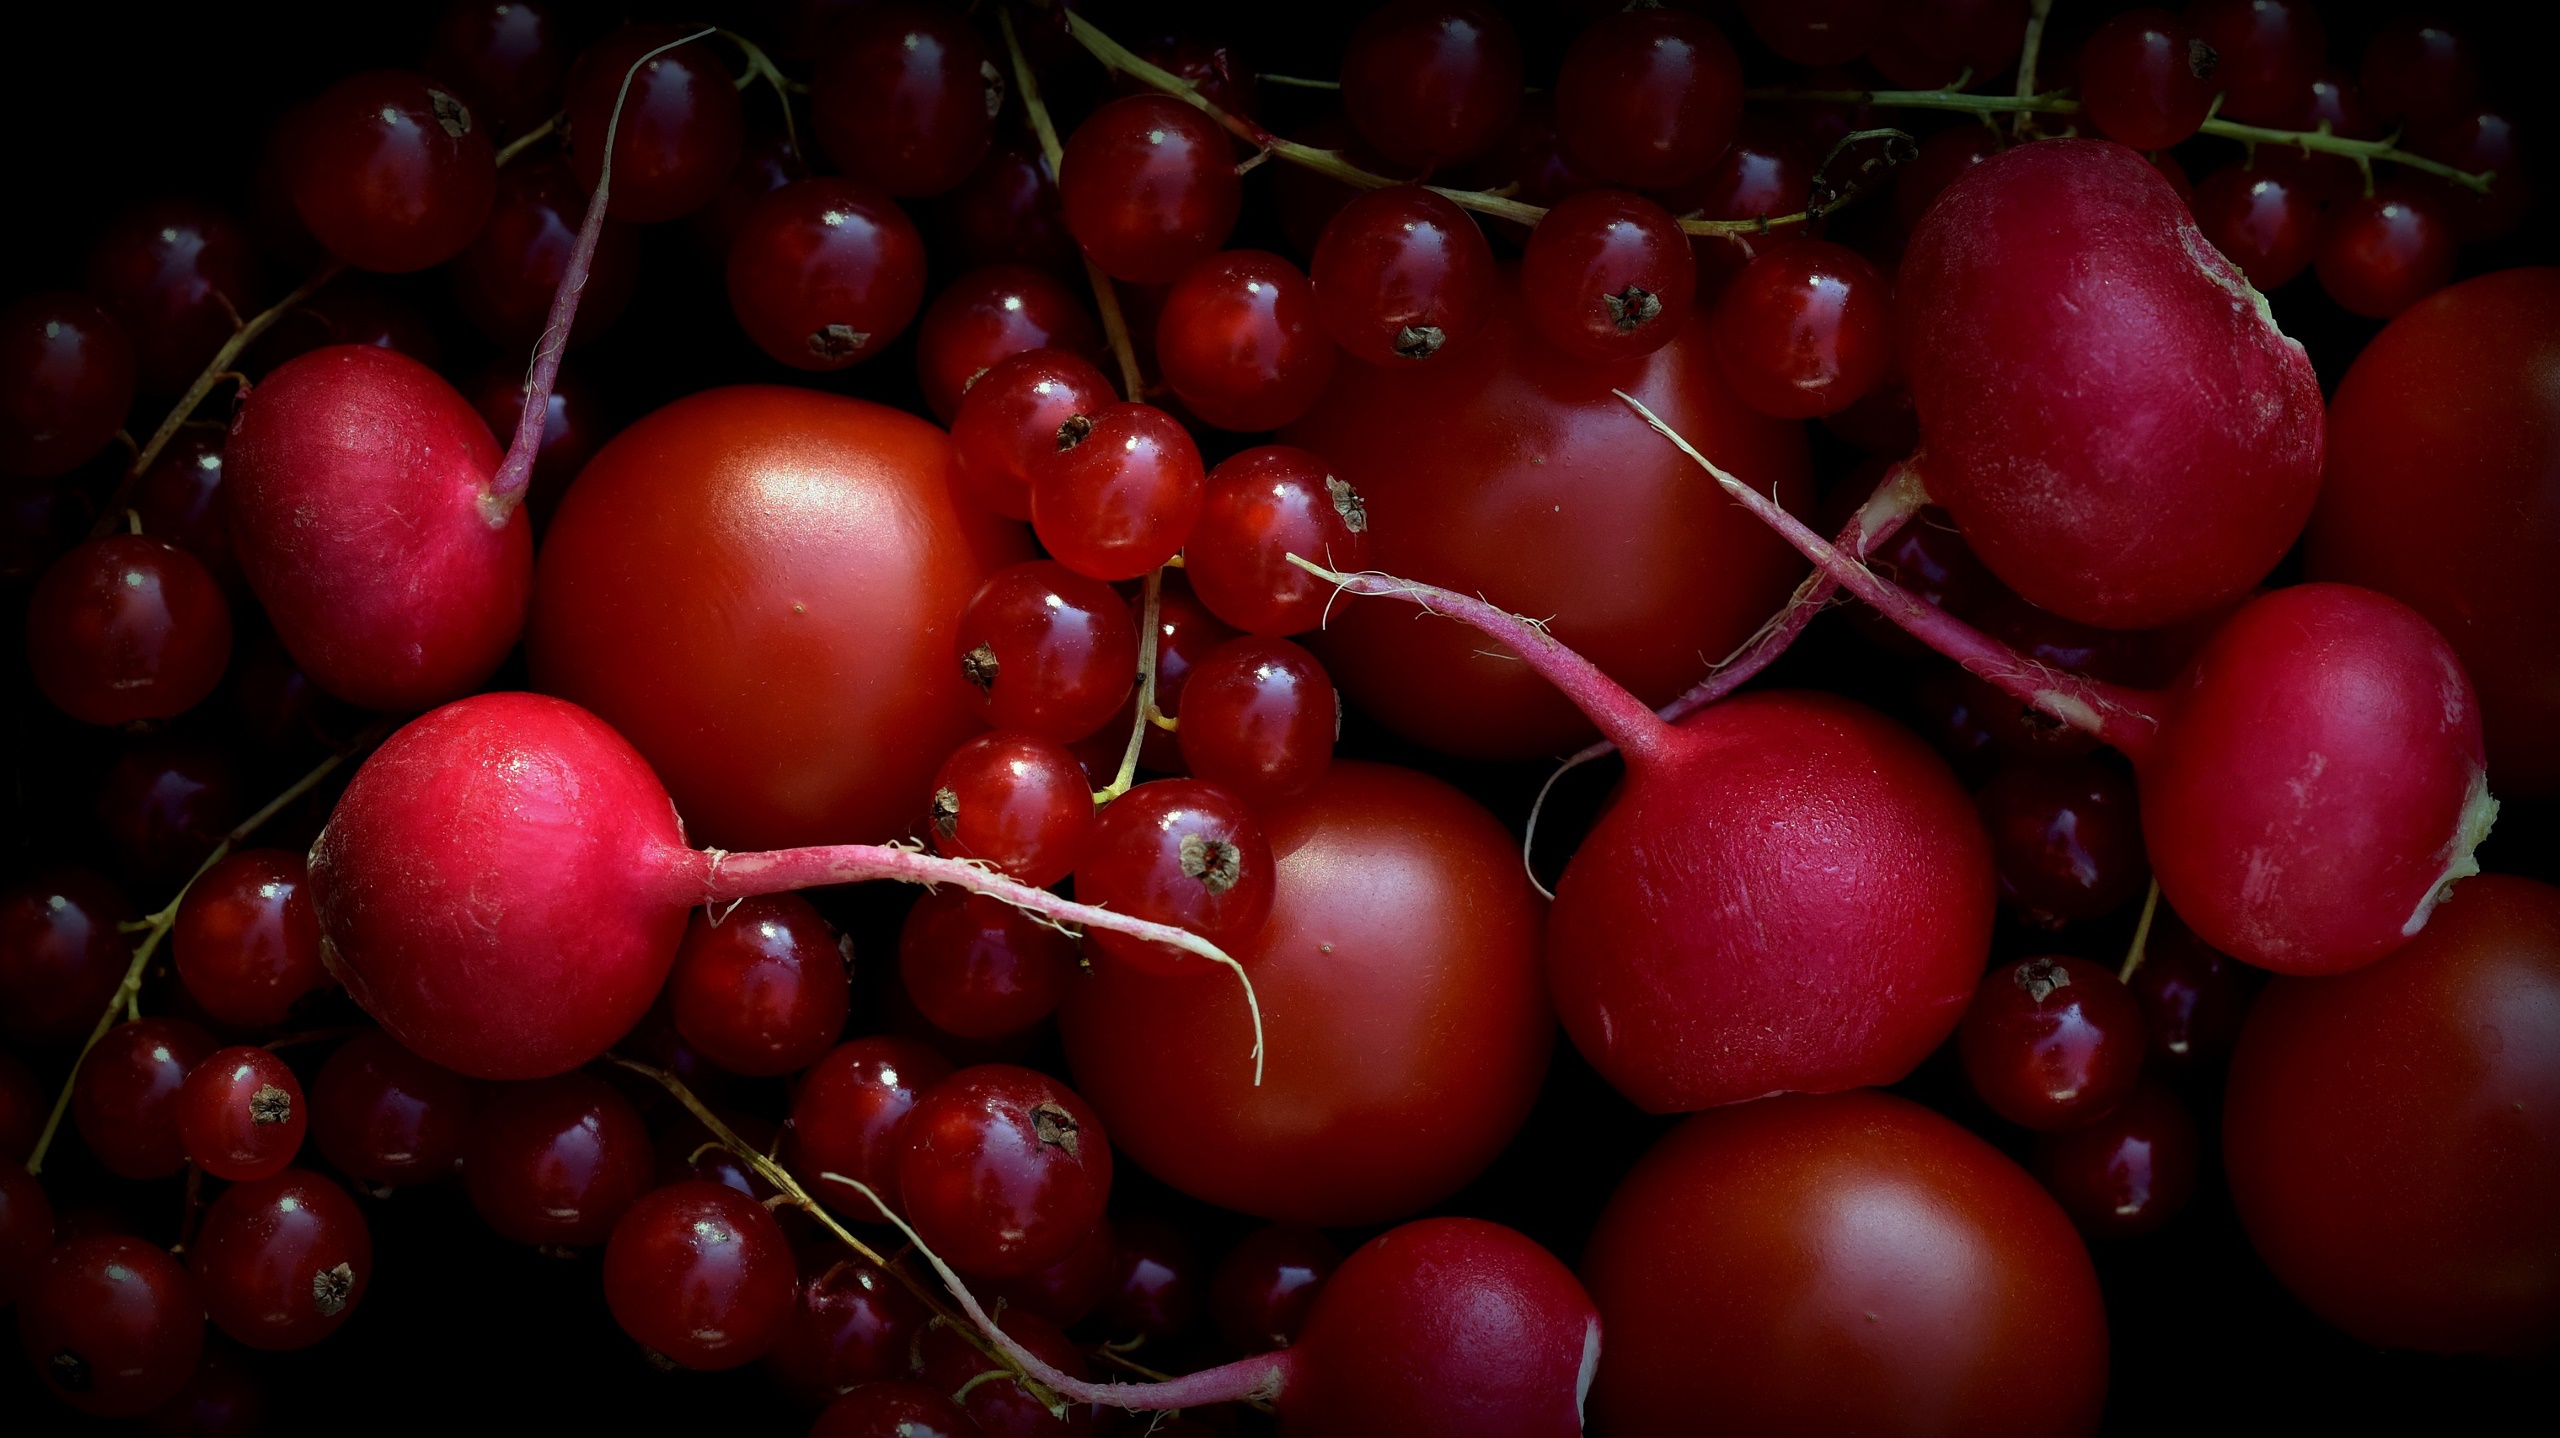 General 2560x1438 red food fruit vegetables radish tomatoes red currant